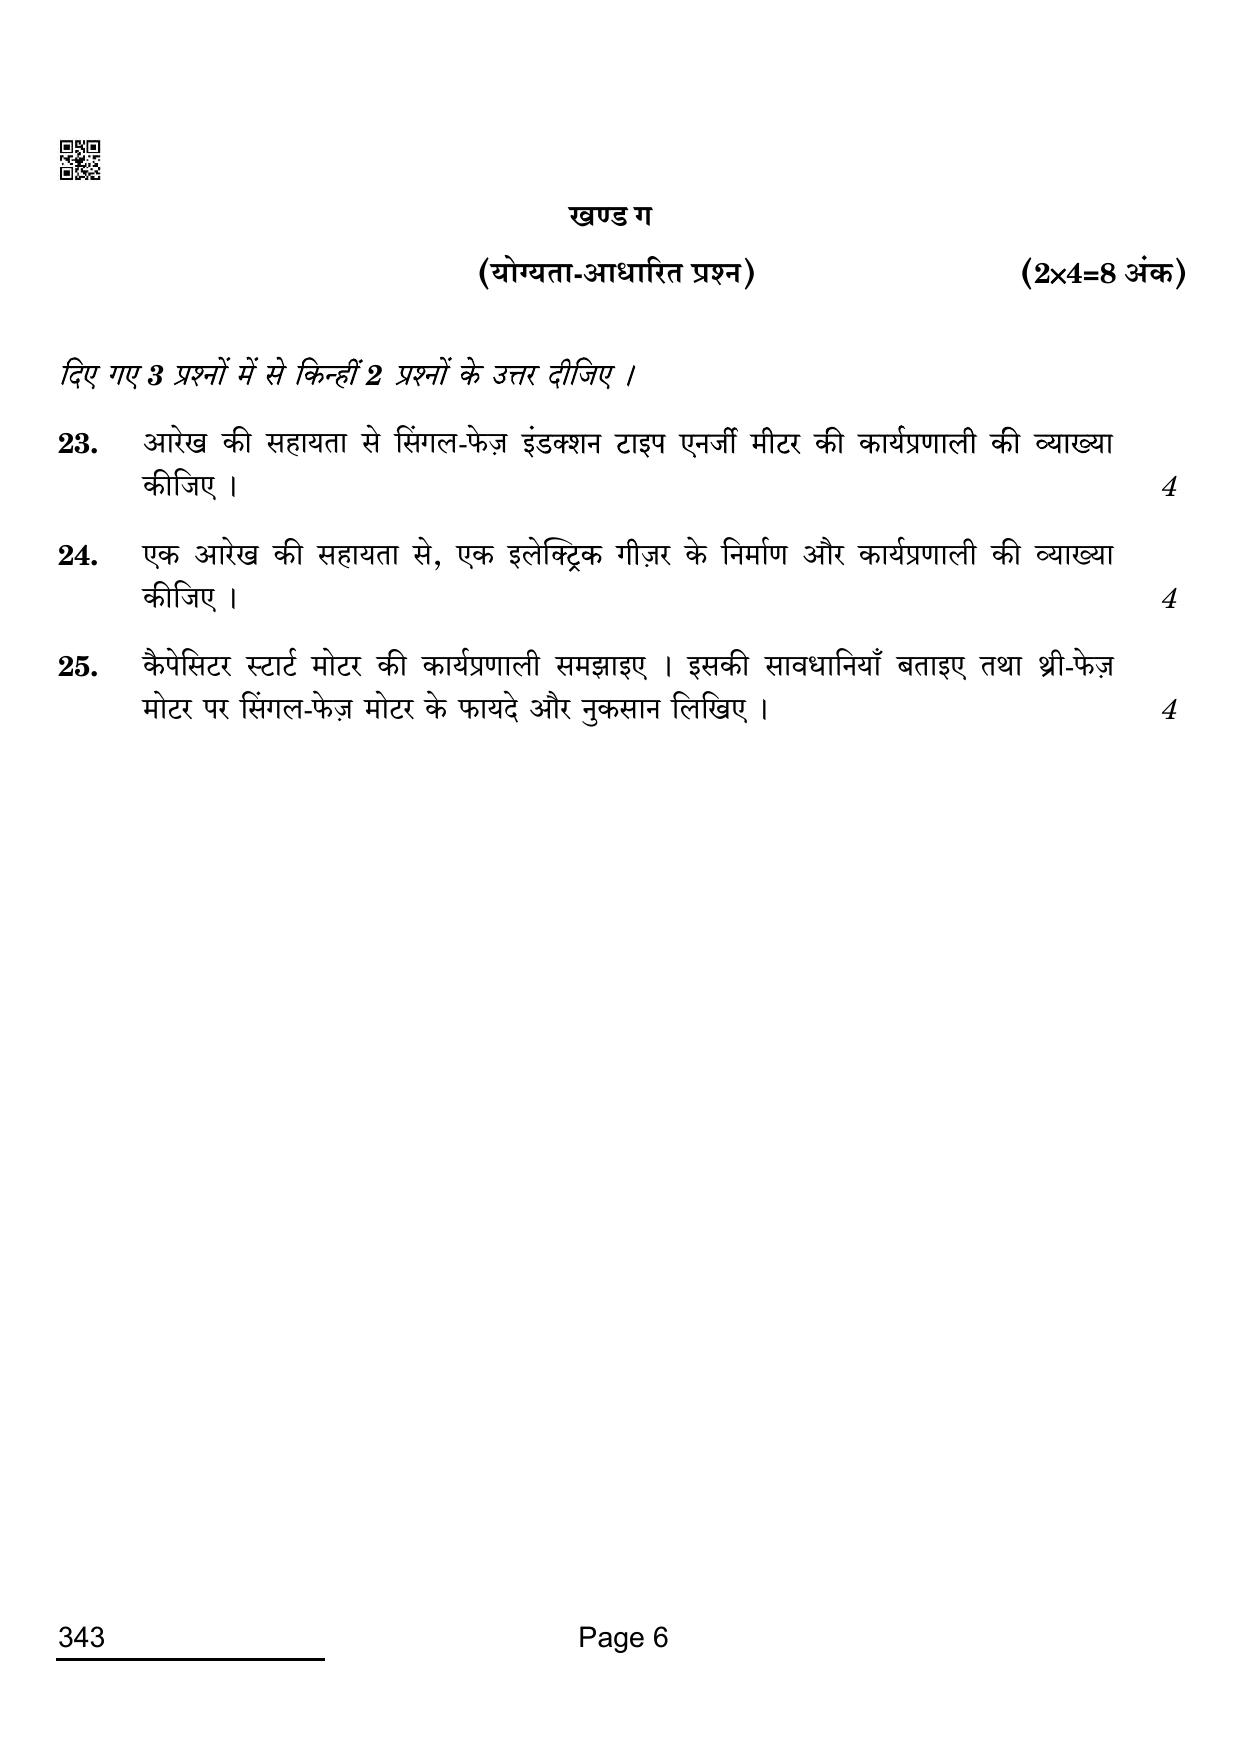 CBSE Class 12 343_Electrical Technology 2022 Question Paper - Page 6